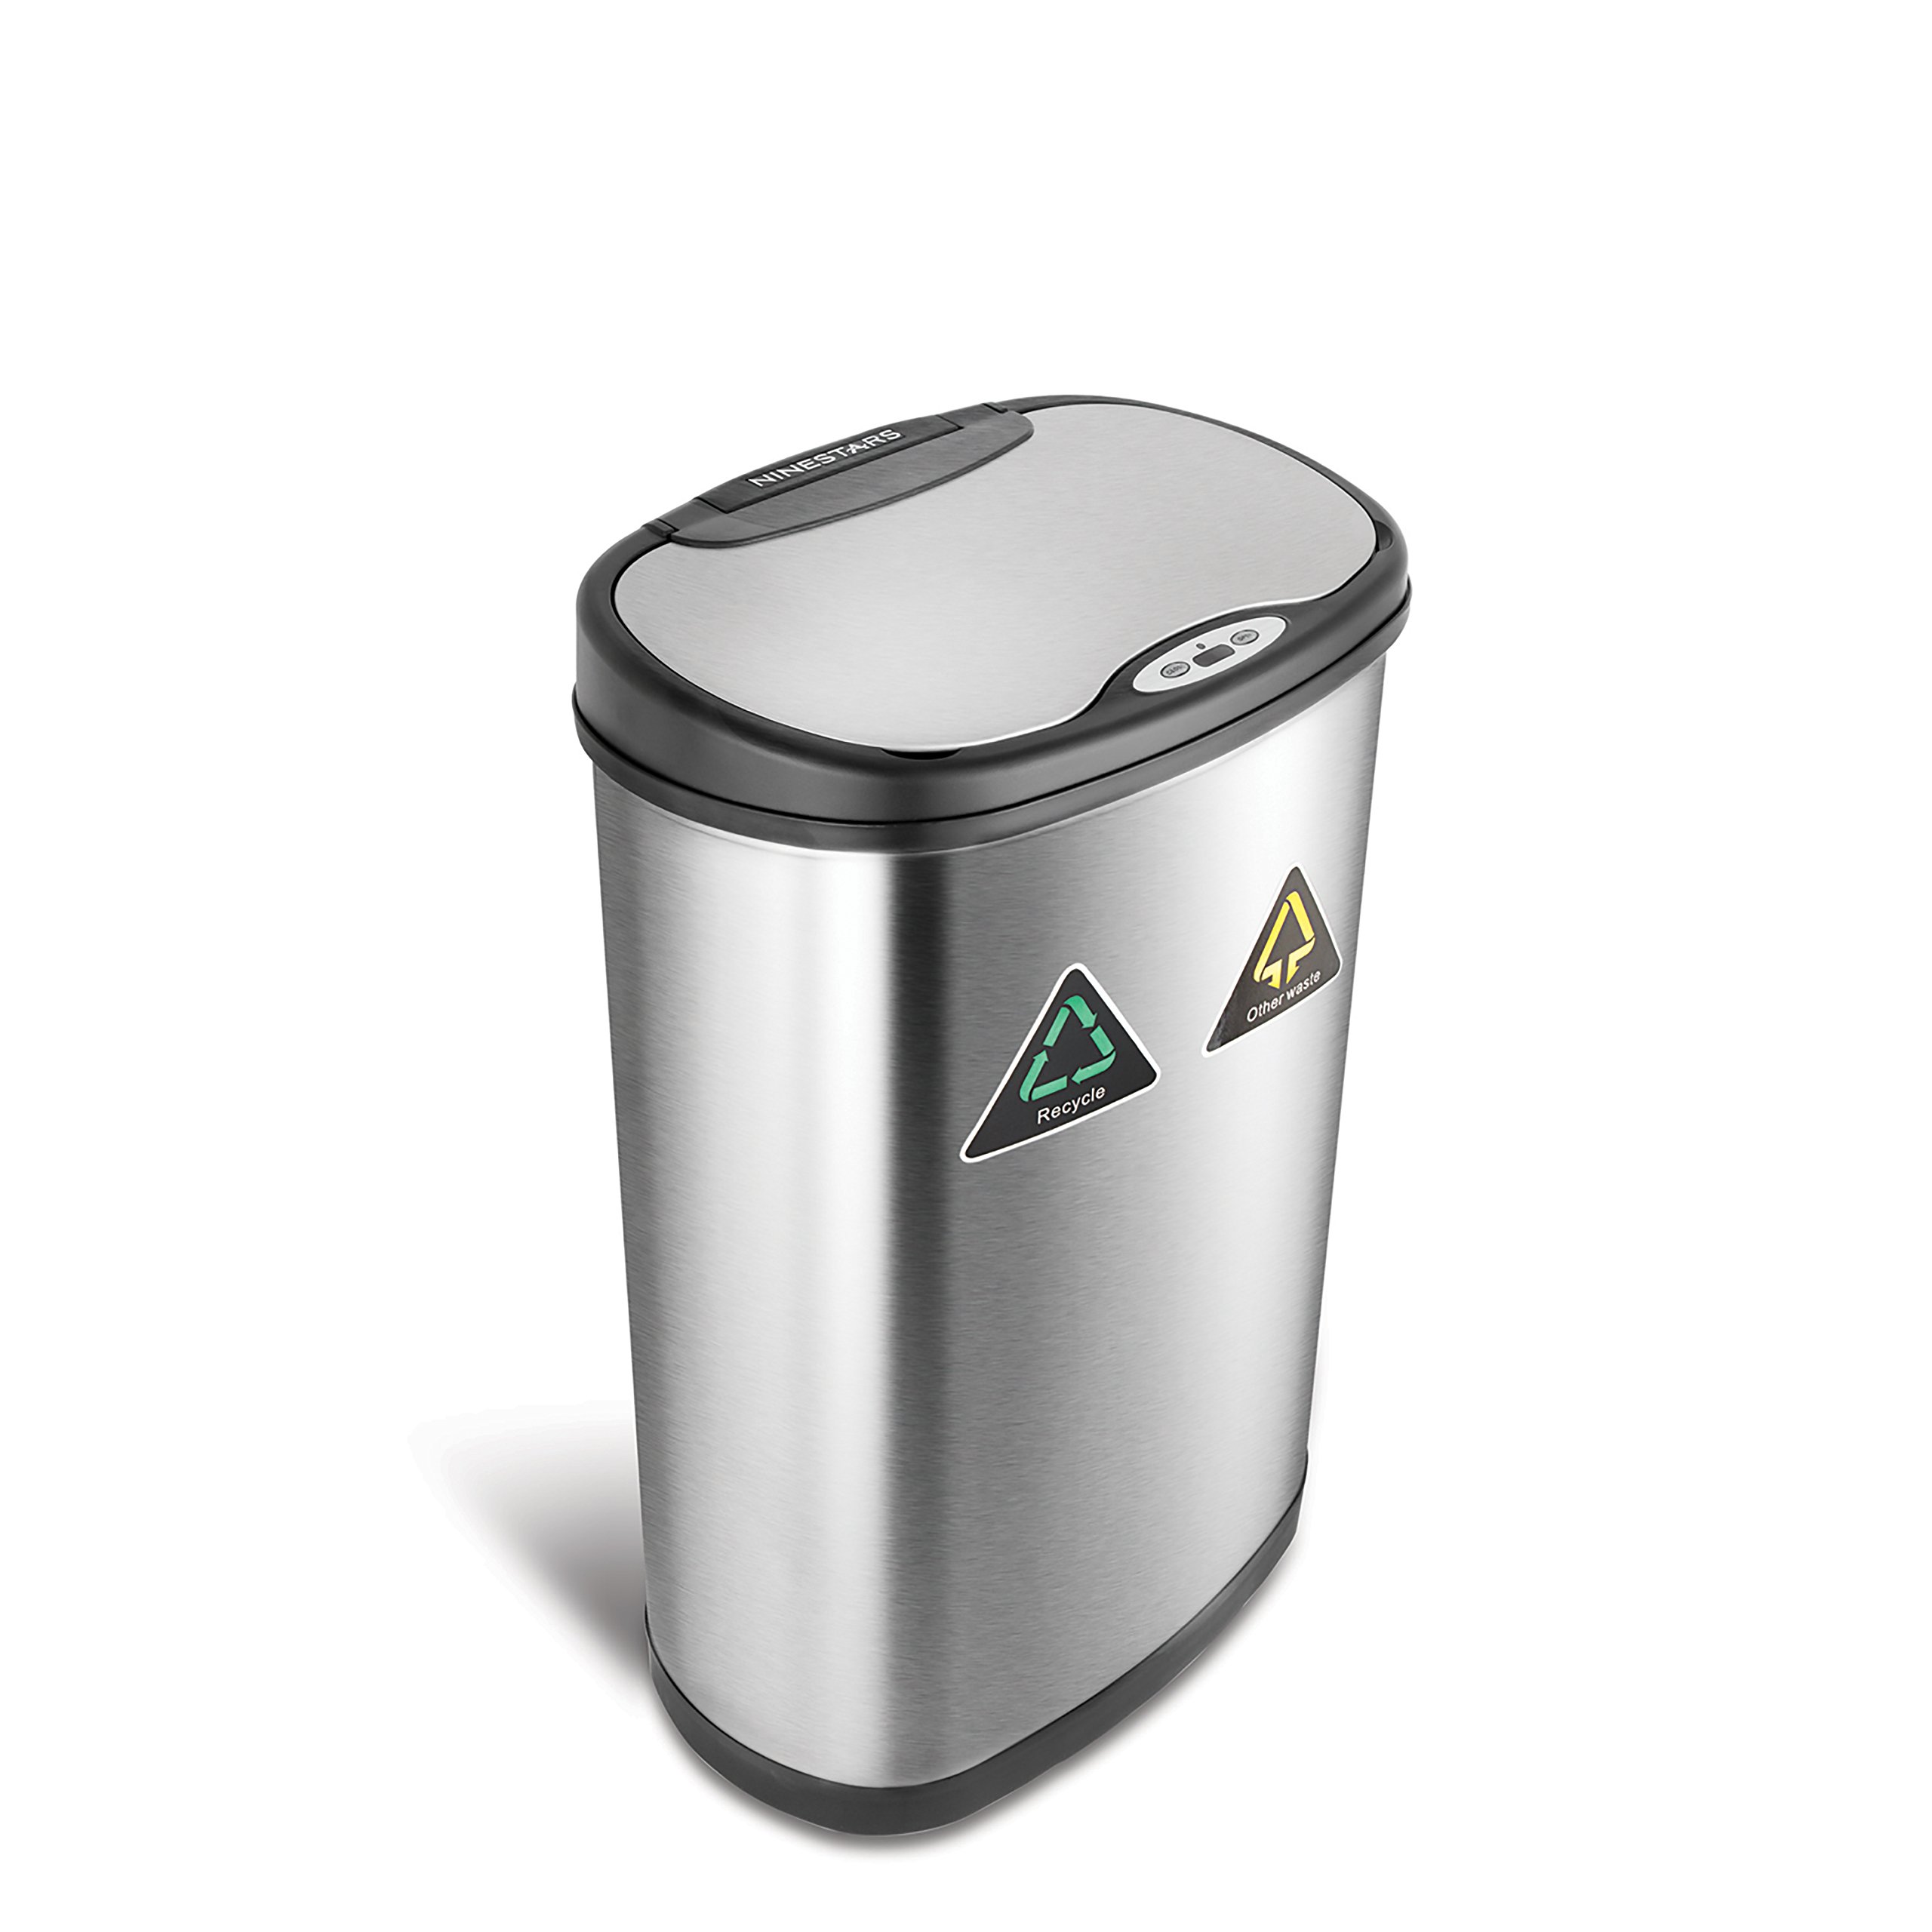 NINESTARS DZT-50-13R Automatic Touchless Infrared Motion Sensor Trash Can/Recycler, 13 Gal 50L, Stainless Steel Base